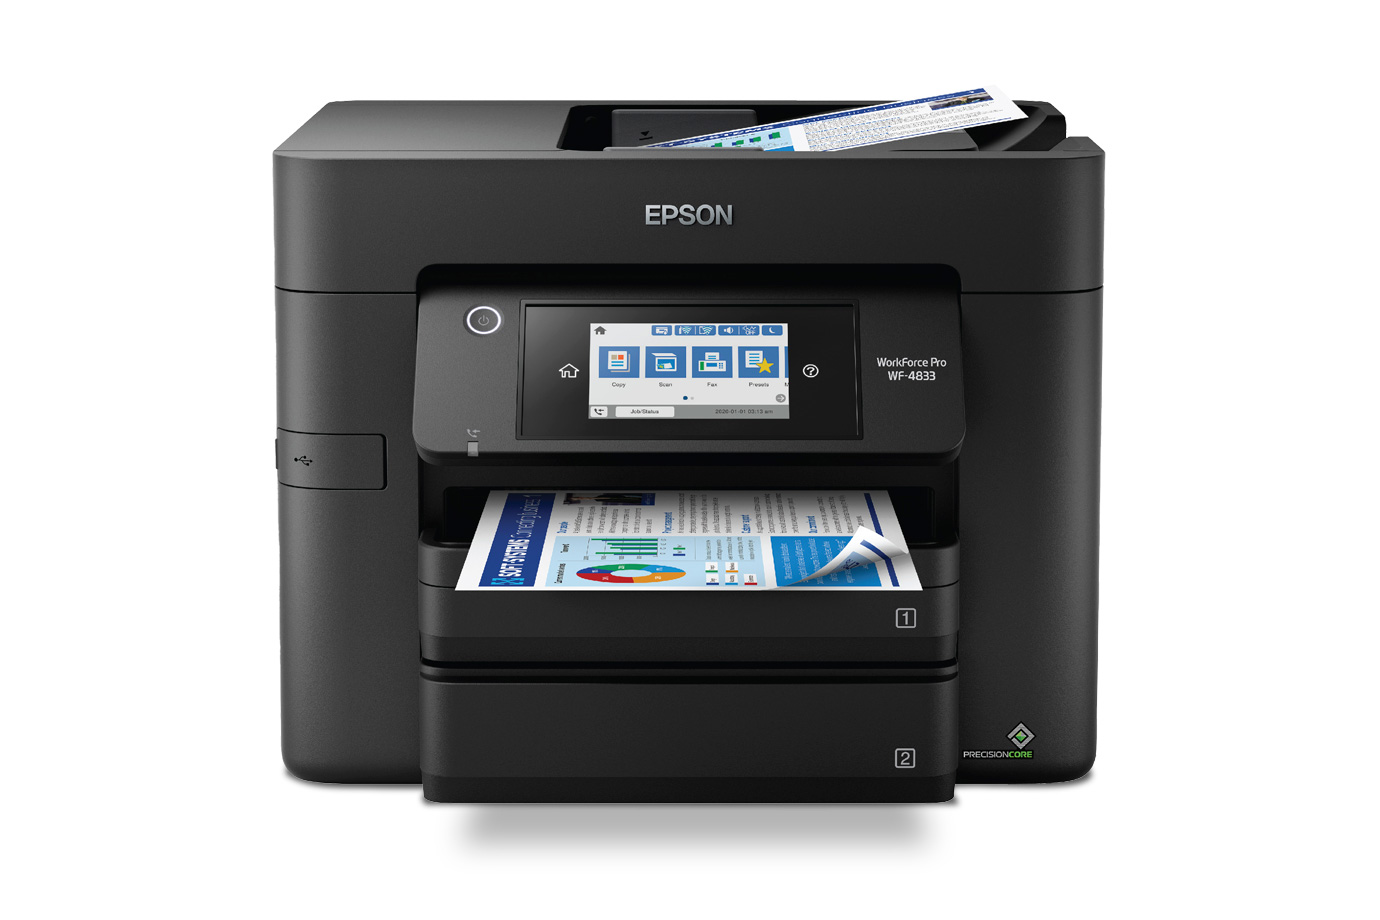 Epson Stylus CX4400 All-in-One Printer | Products | Epson US